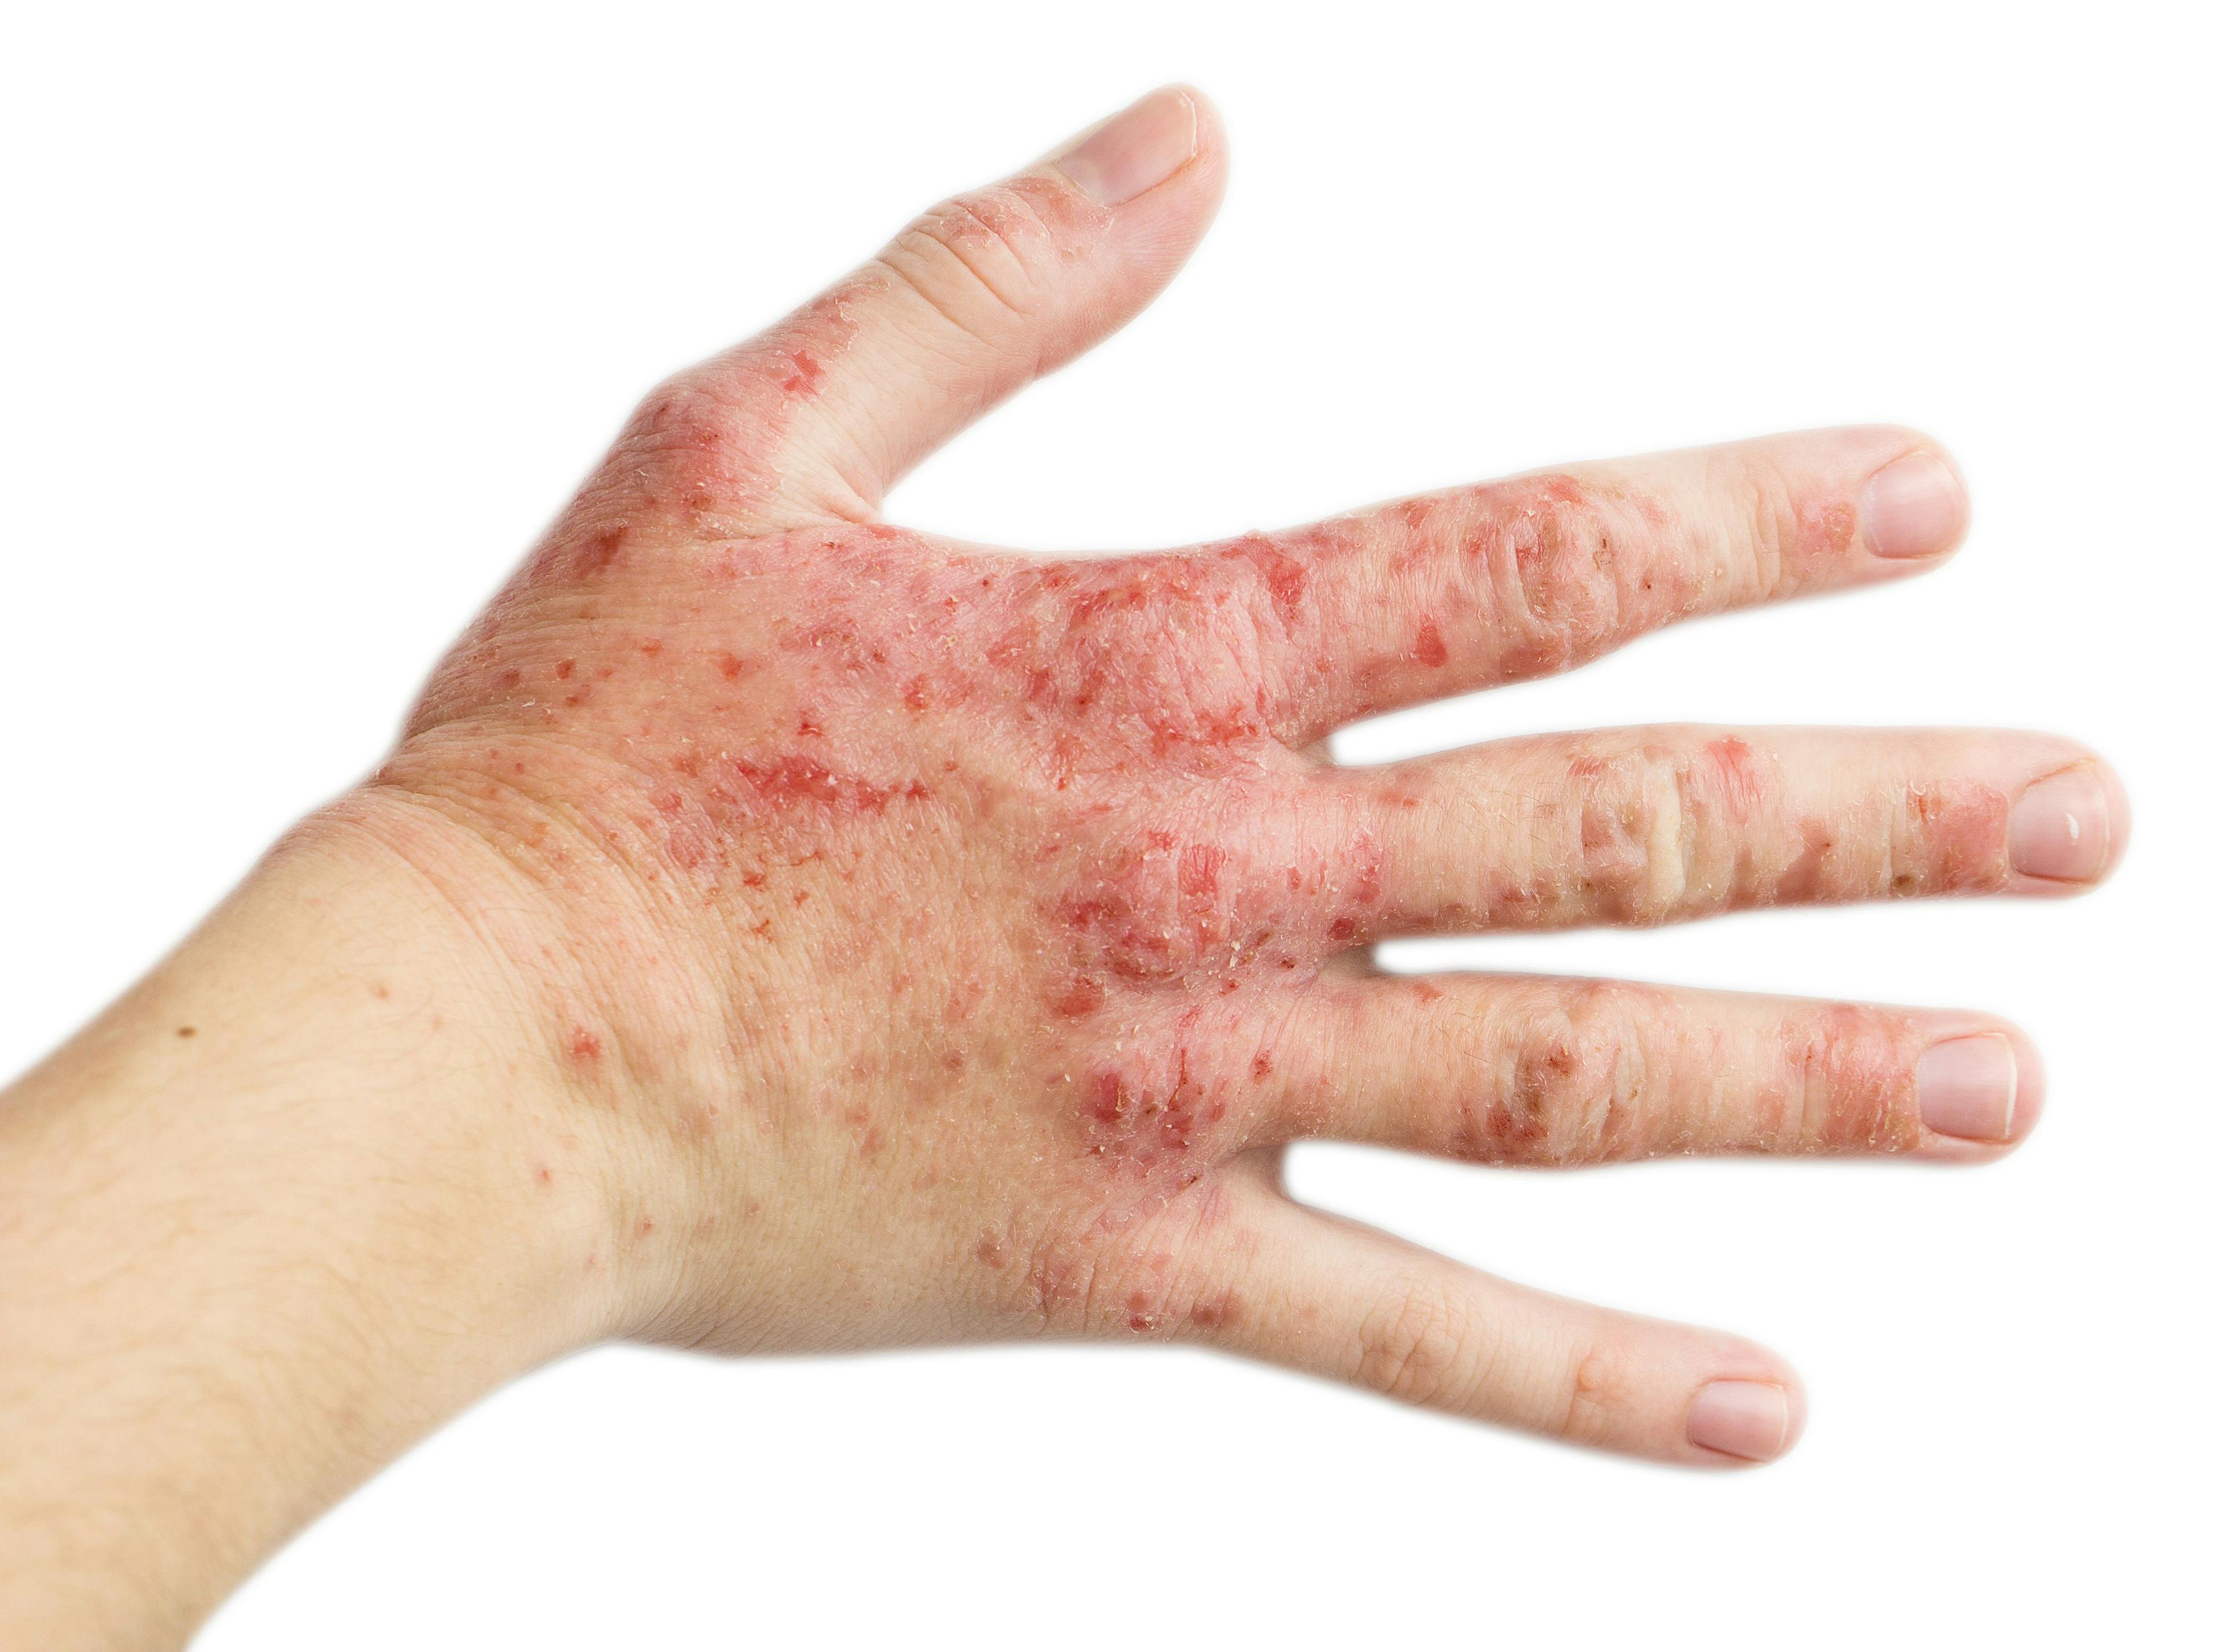 JAK Inhibitors Have Potential Uses for Treatment of Atopic Dermatitis